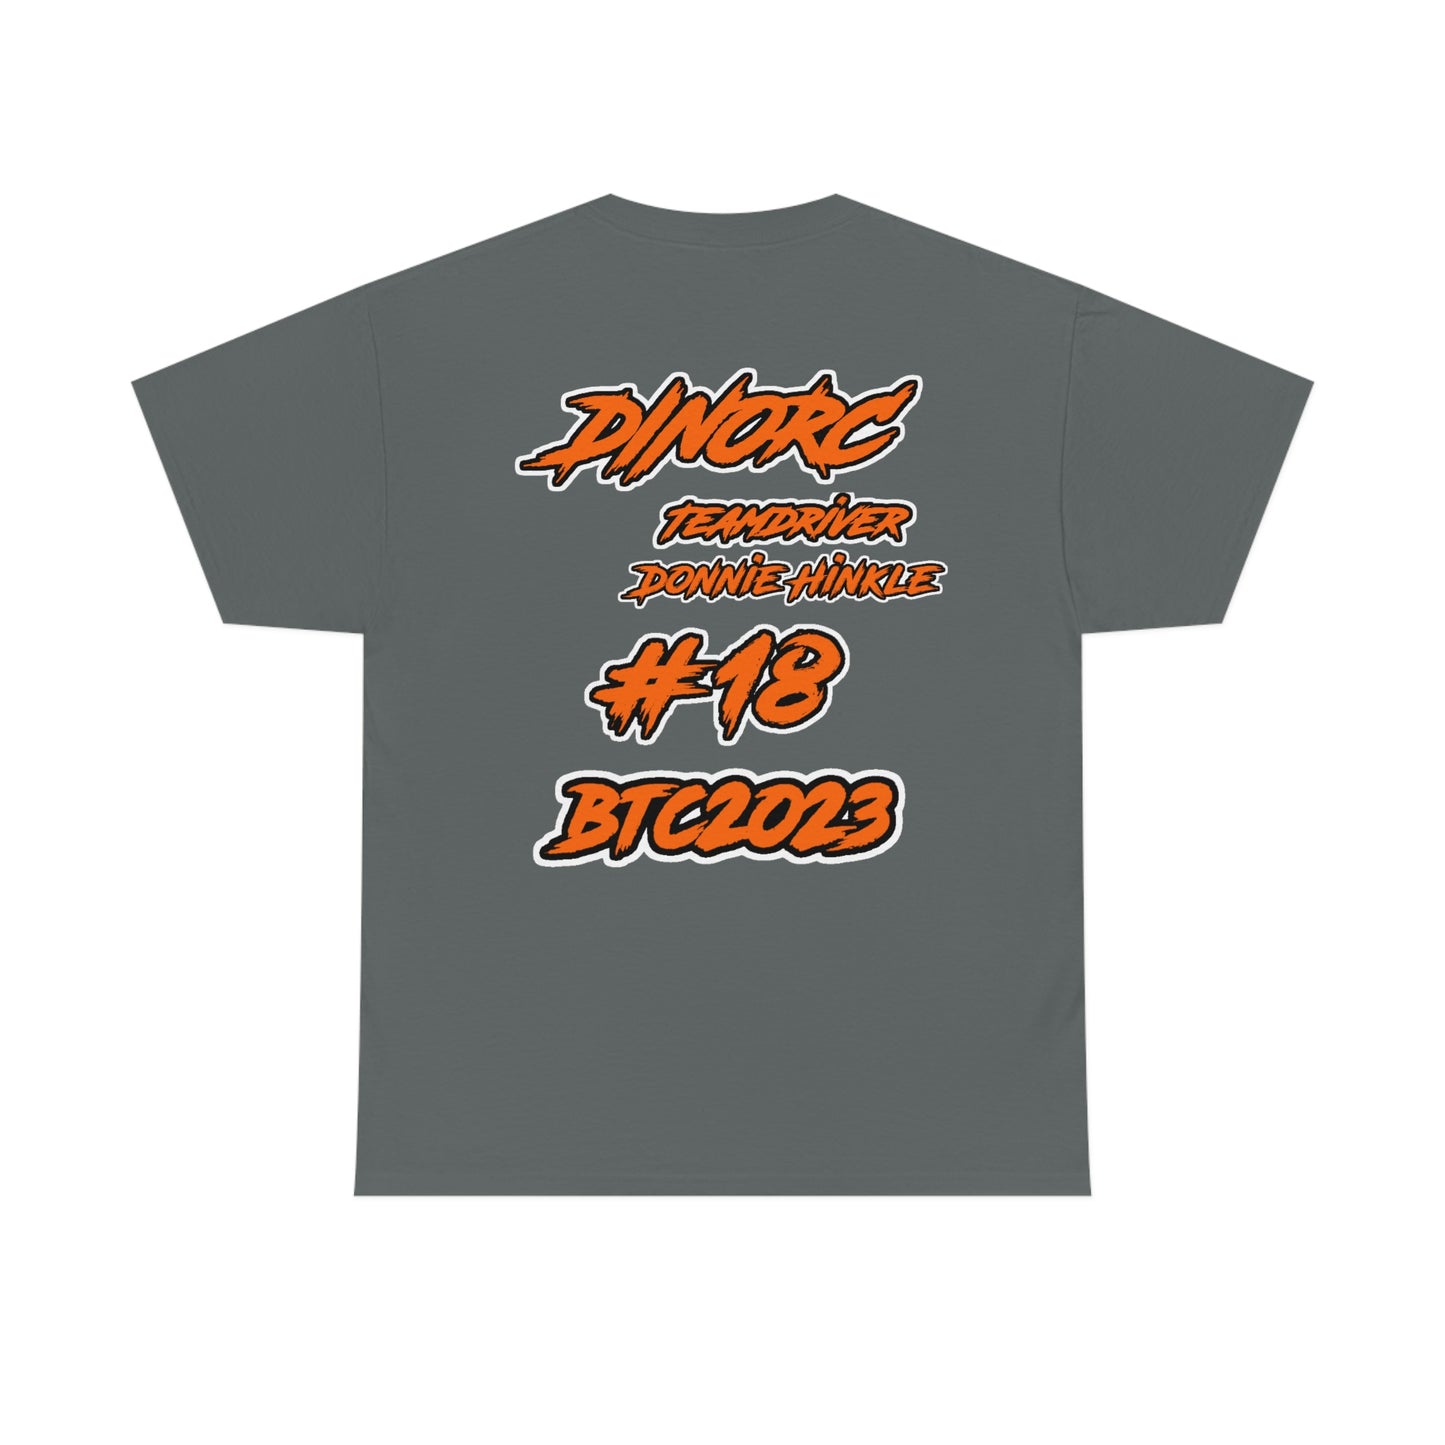 Donnie Hinkle DinoRC Team Driver ERRR RC  Front and Back DinoRc Logo T-Shirt S-5x 5 colors